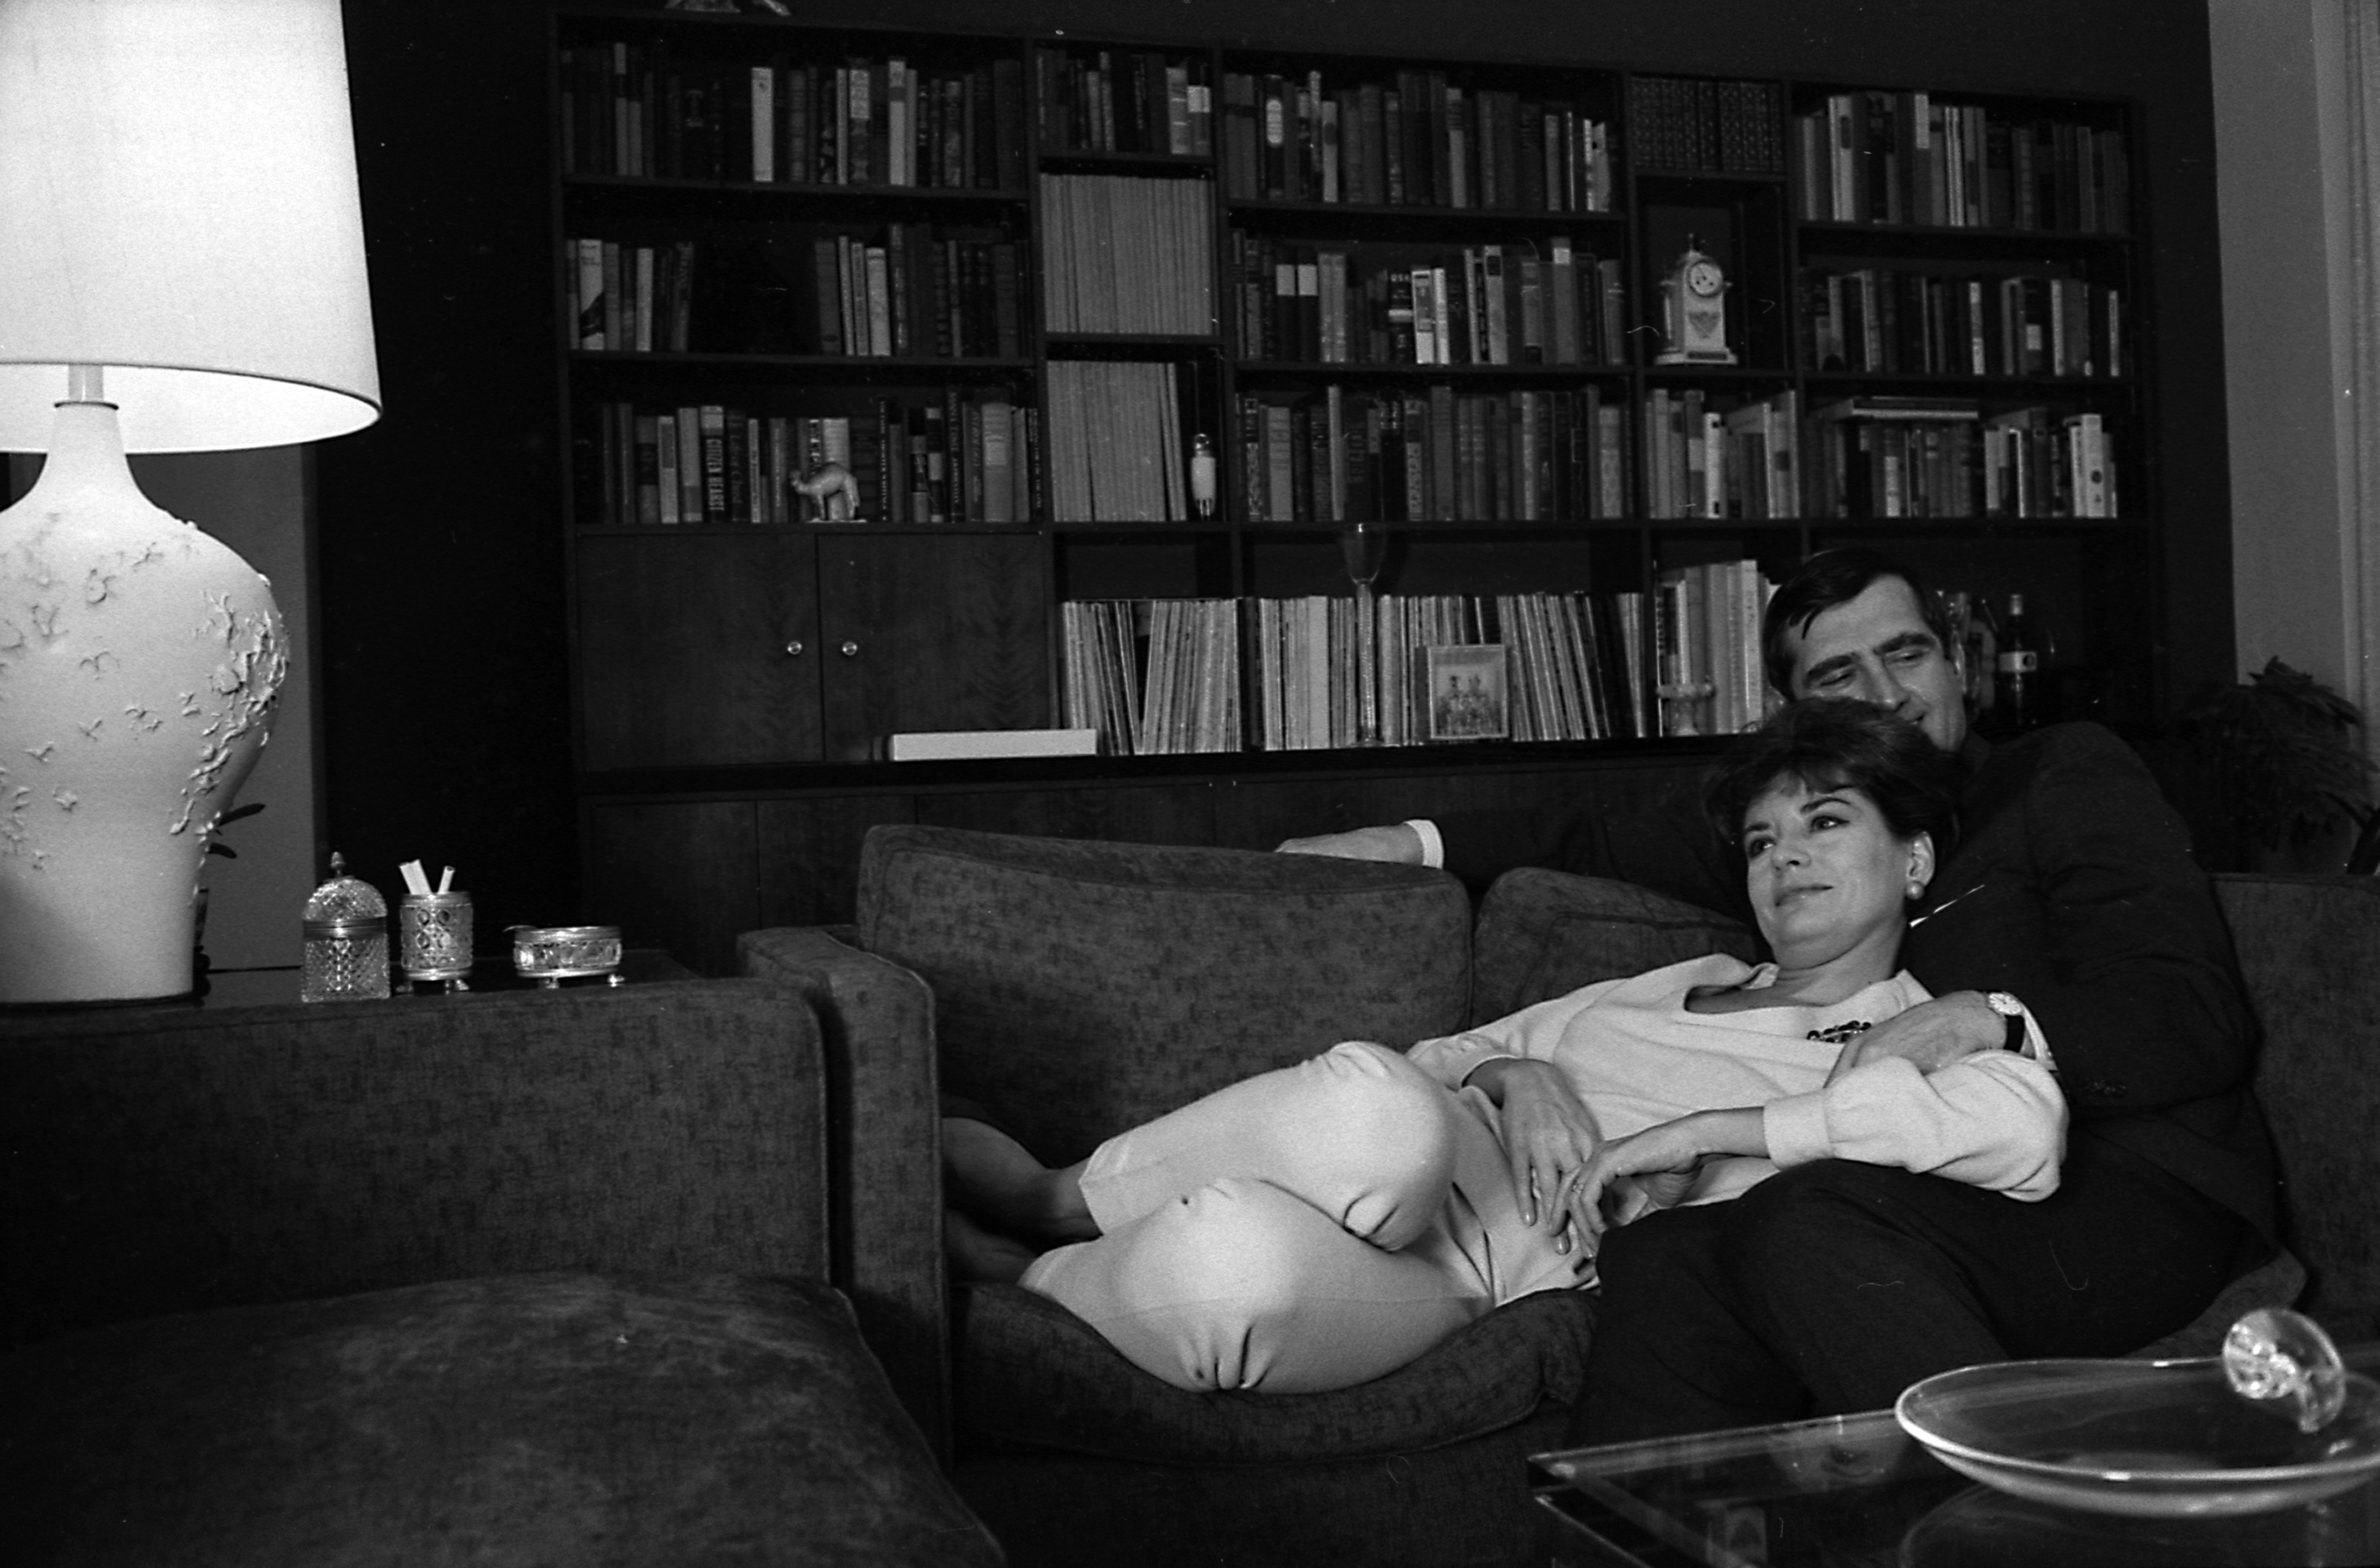 Barbara Walters and her husband, businessman Lee Guber, pictured on a couch at home in 1966, New York. / Source: Getty Images